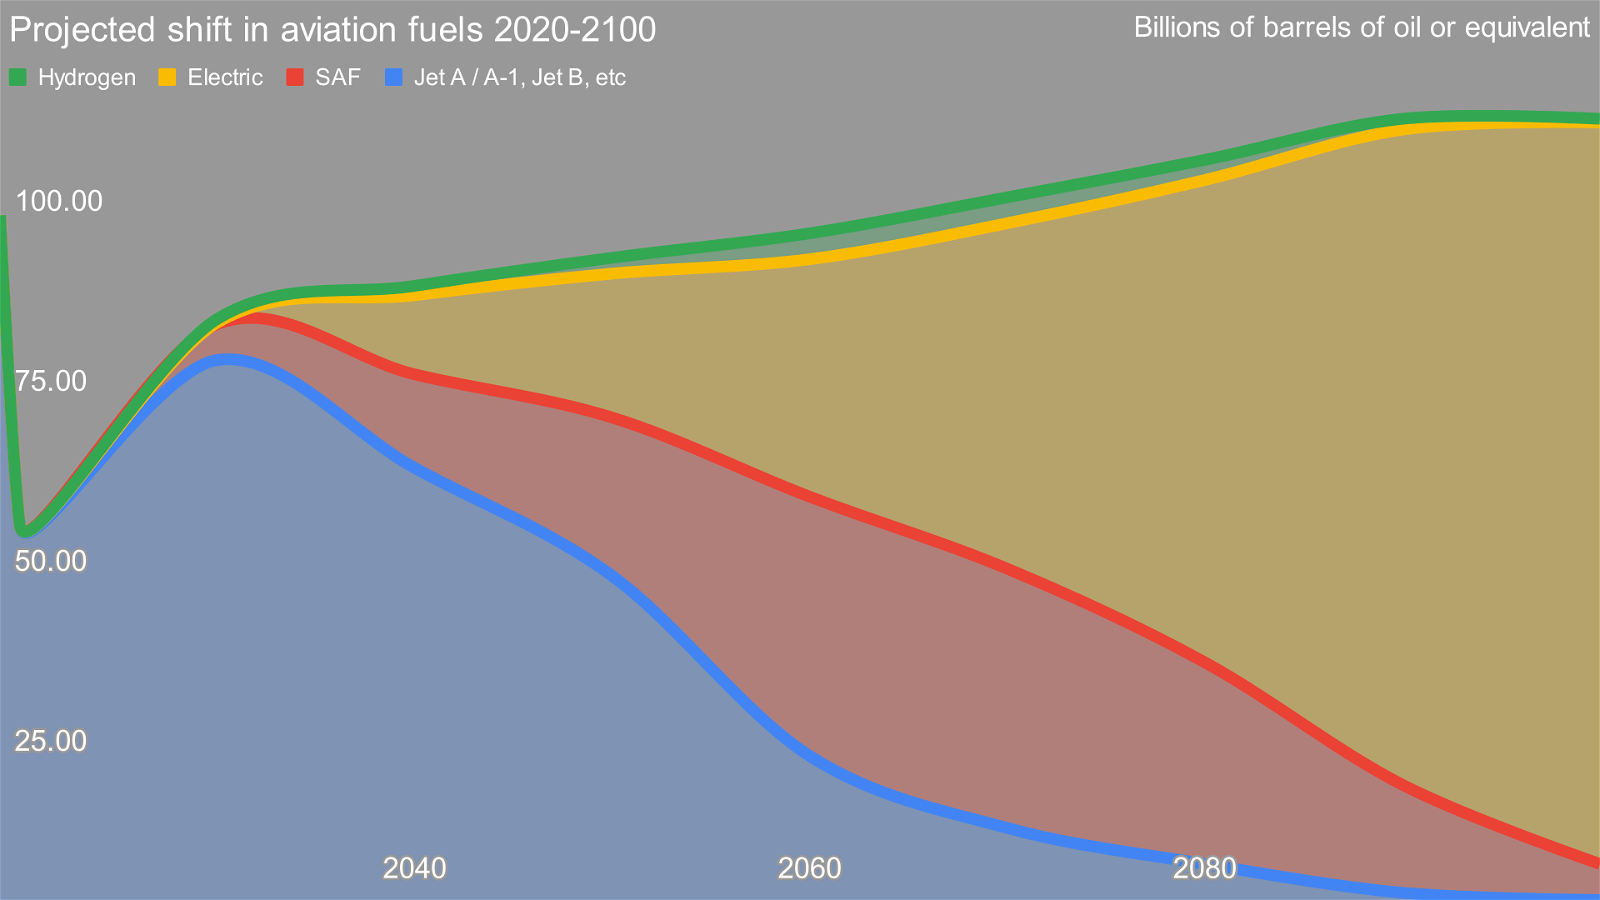 Figure 3: Projection of aviation fuel demand through 2100 by author